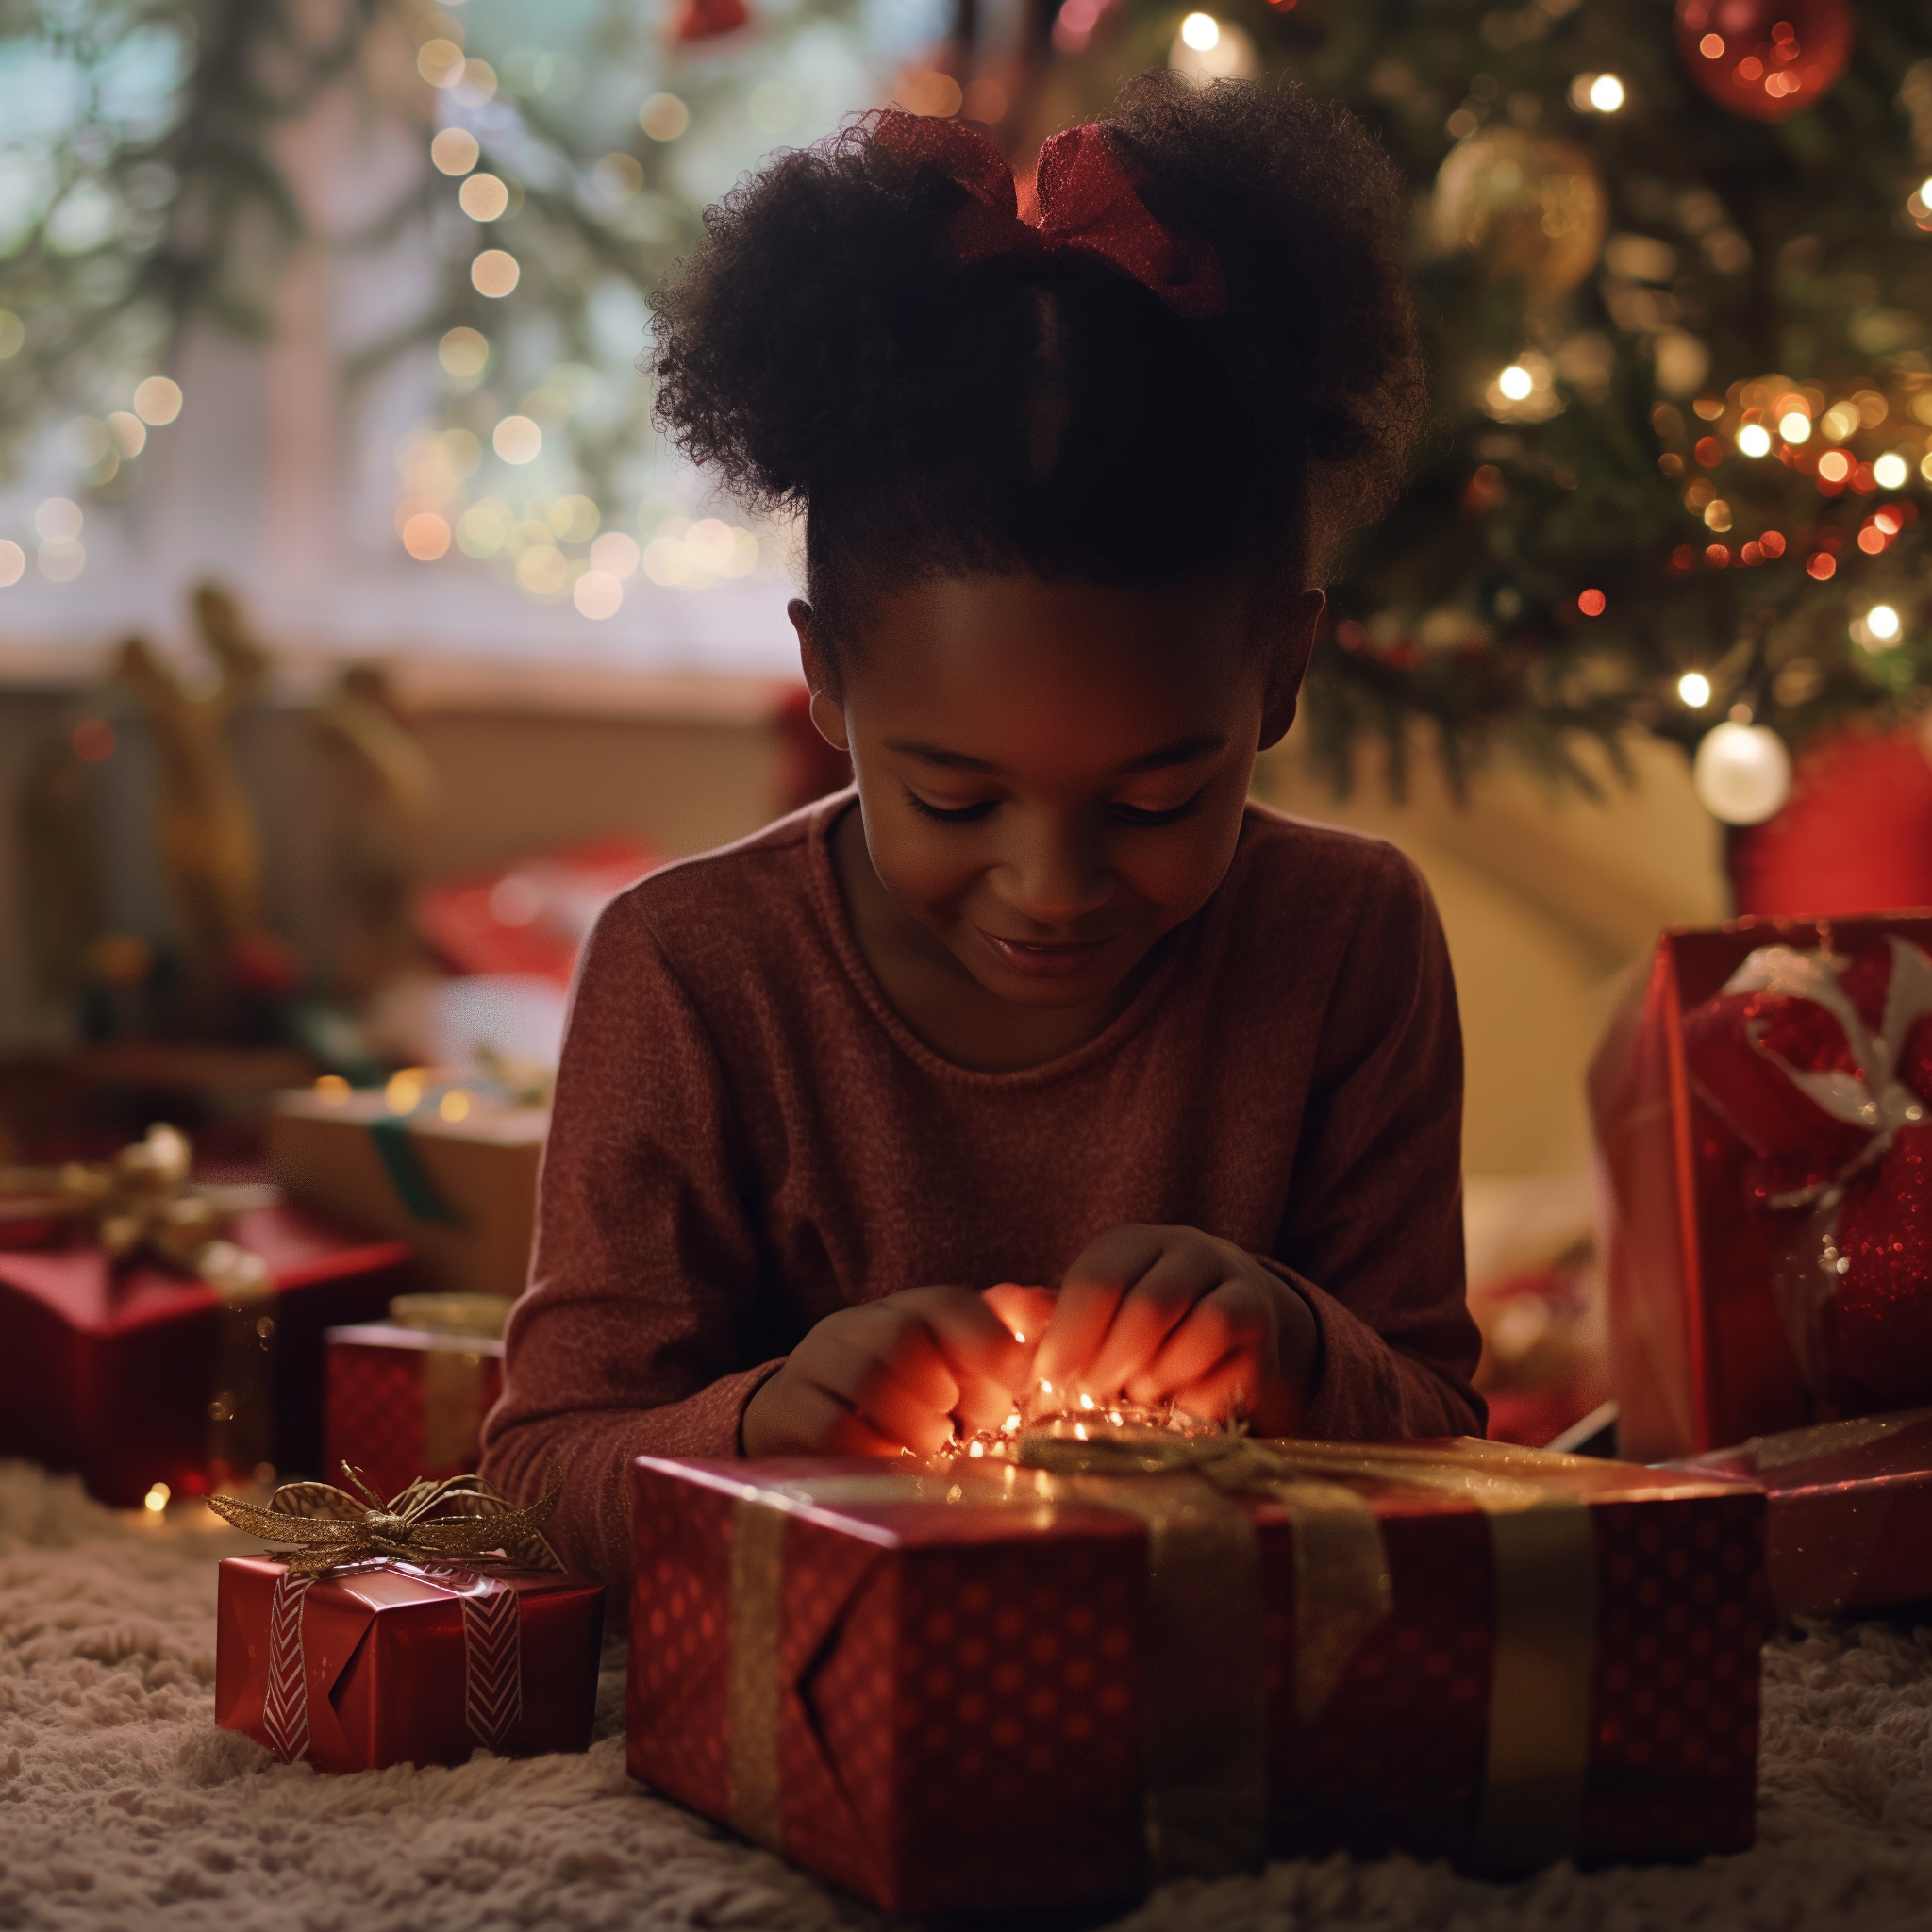 A little girl opening her presents | Source: Midjourney